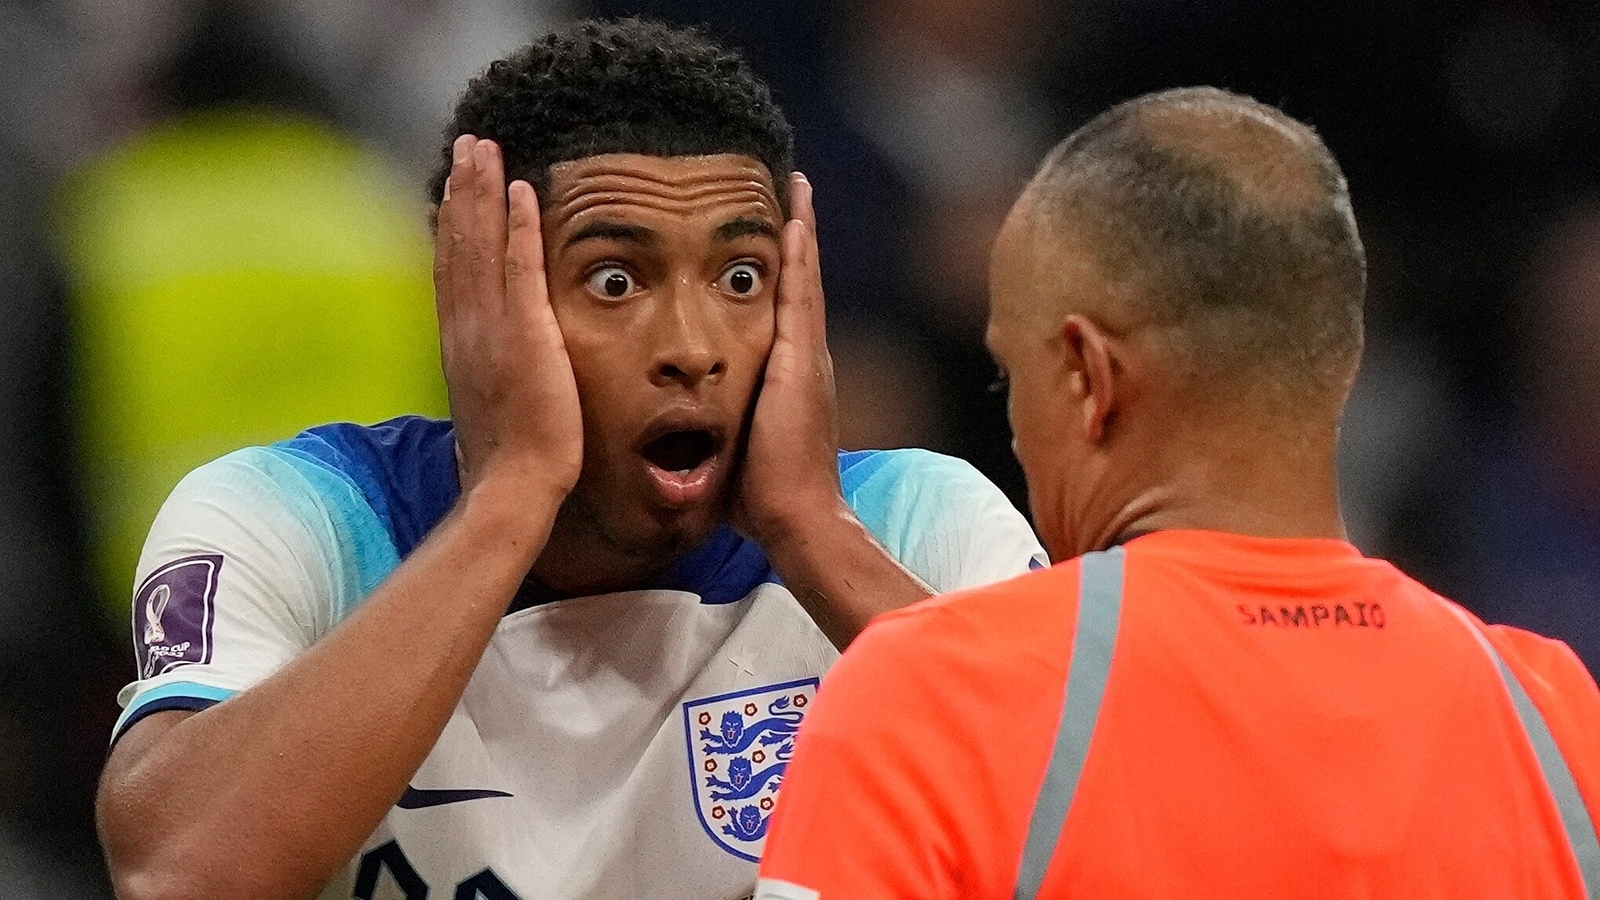 ‘I’ll end up getting fined’: England stars Maguire, Bellingham bash ‘joke of a referee’ Wilton Sampaio after France loss